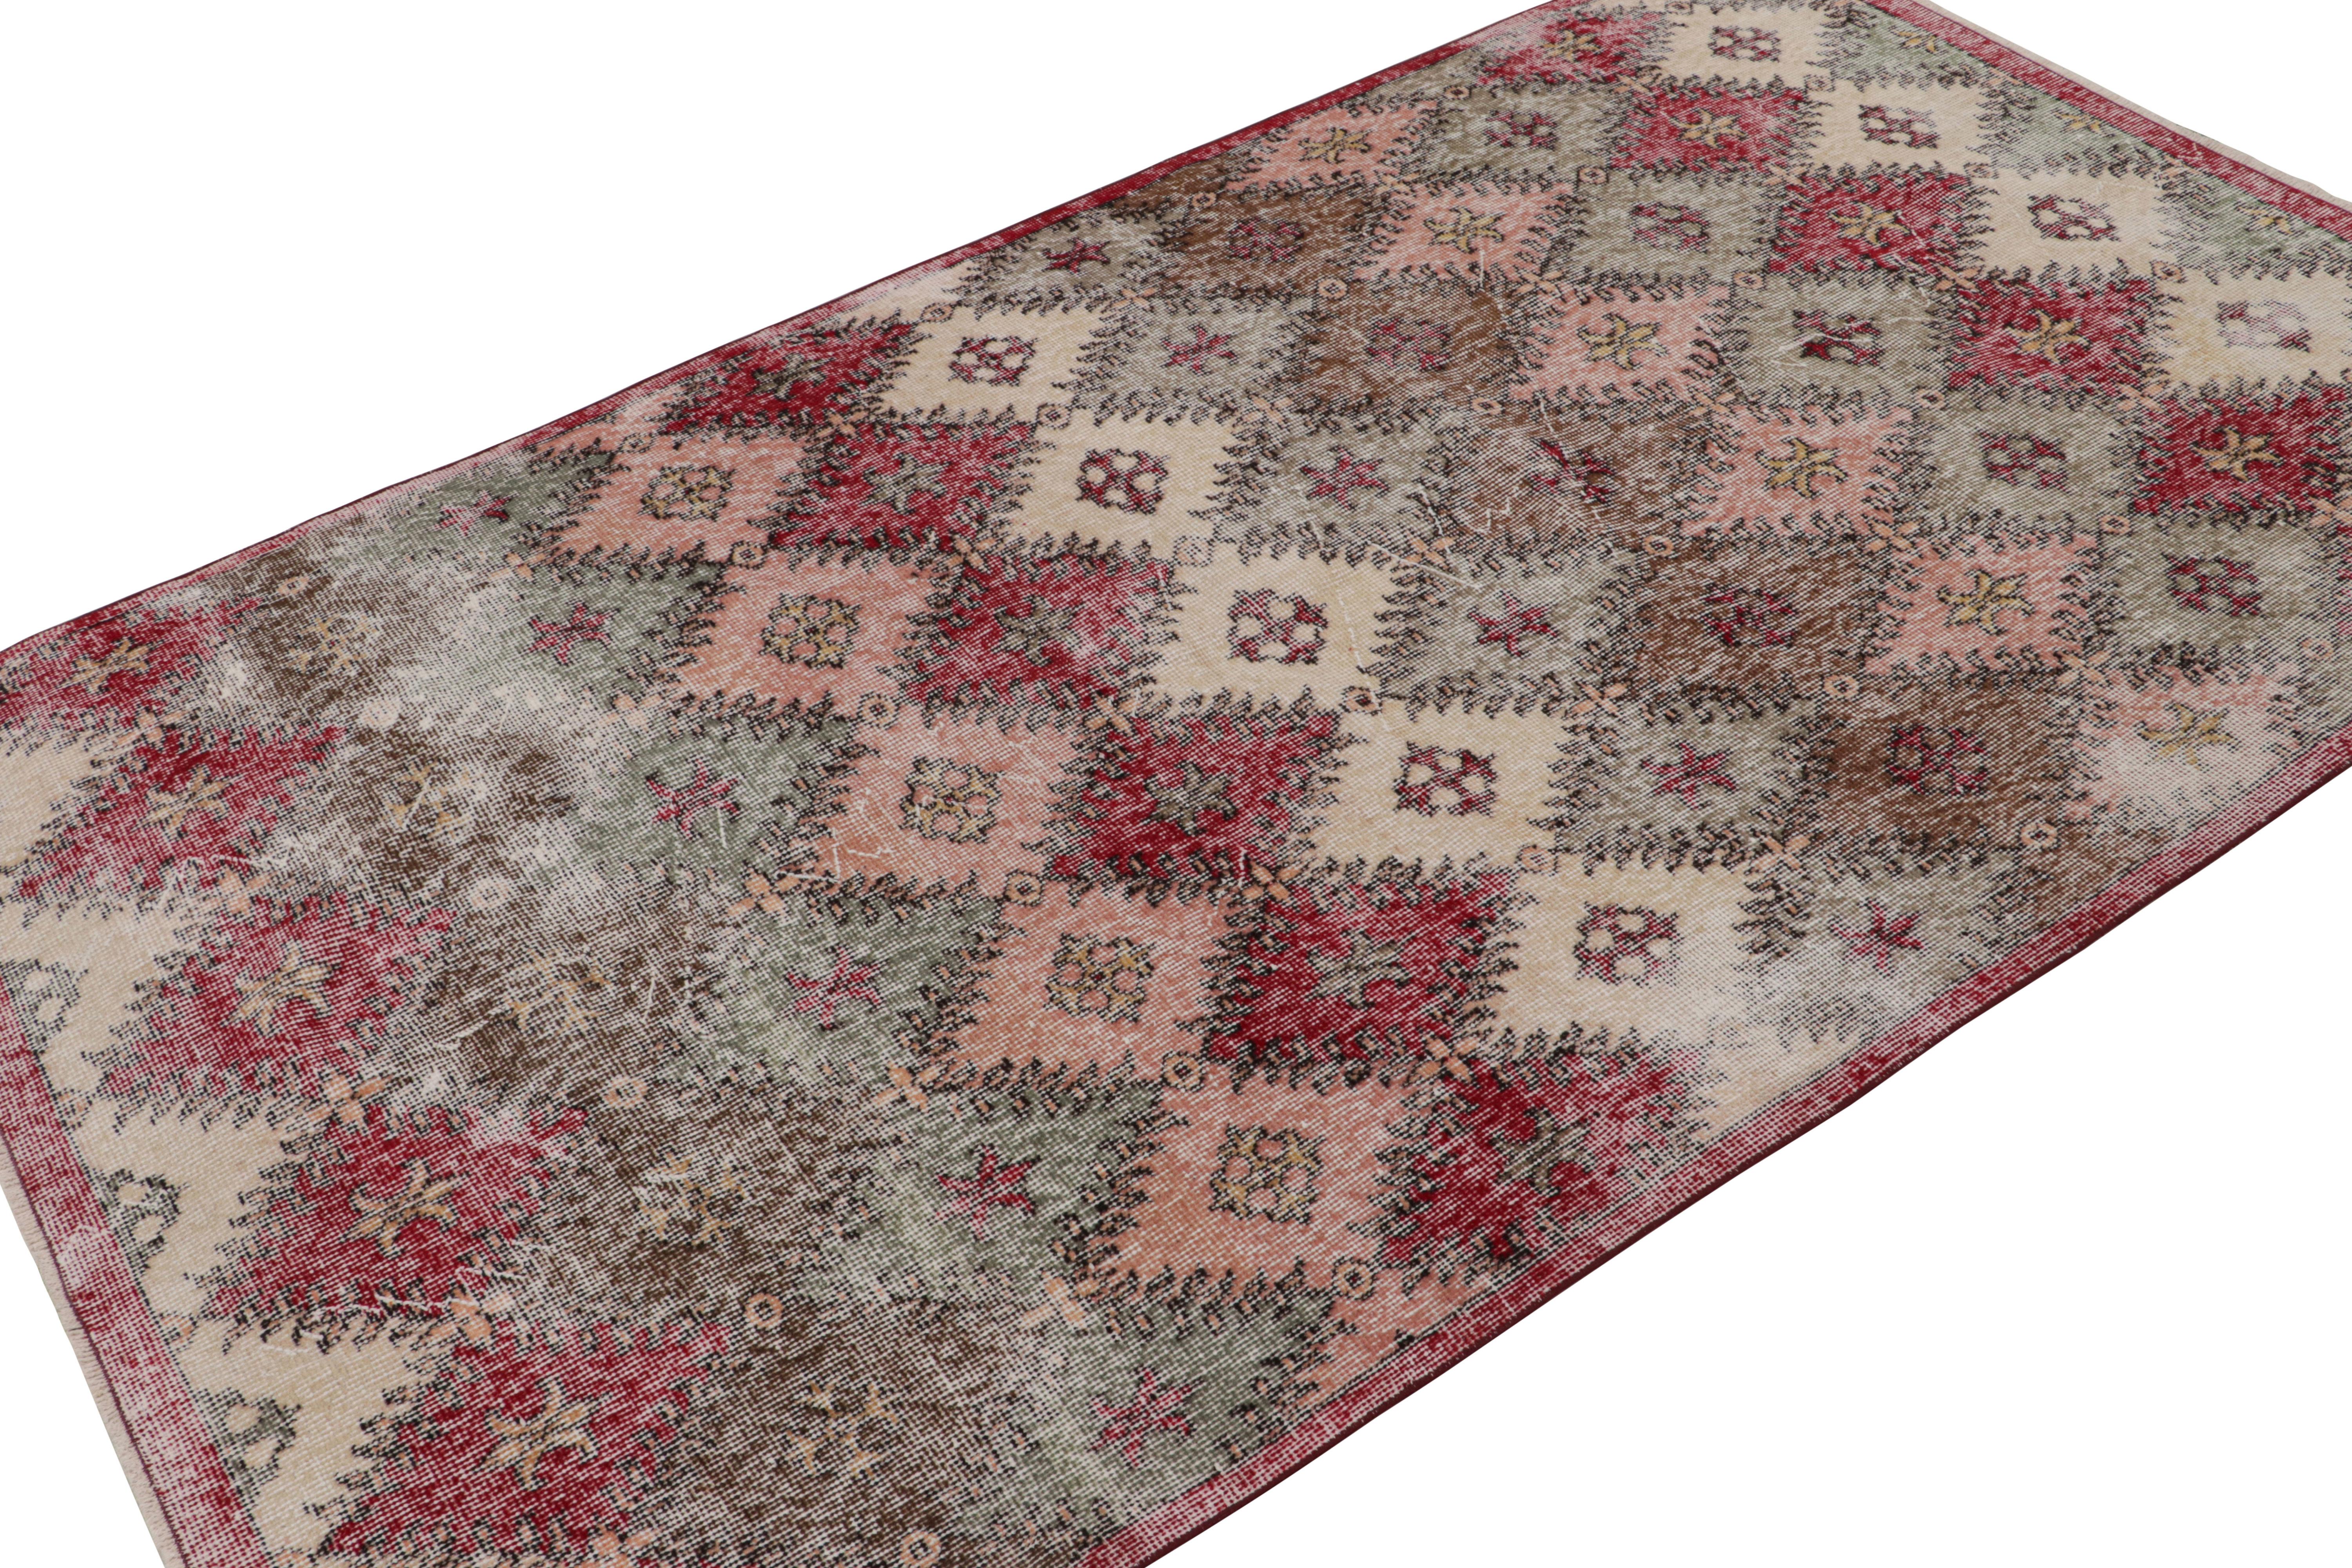 Handknotted in wool, this 5x8 v Art deco Zeki Múren runner originates from Turkey, circa 1960-1970 and is latest to join Rug & Kilim’s repertoire of vintage selections. 

On the Design:

Believed to hail from the Turkish artist Zeki Muren, this